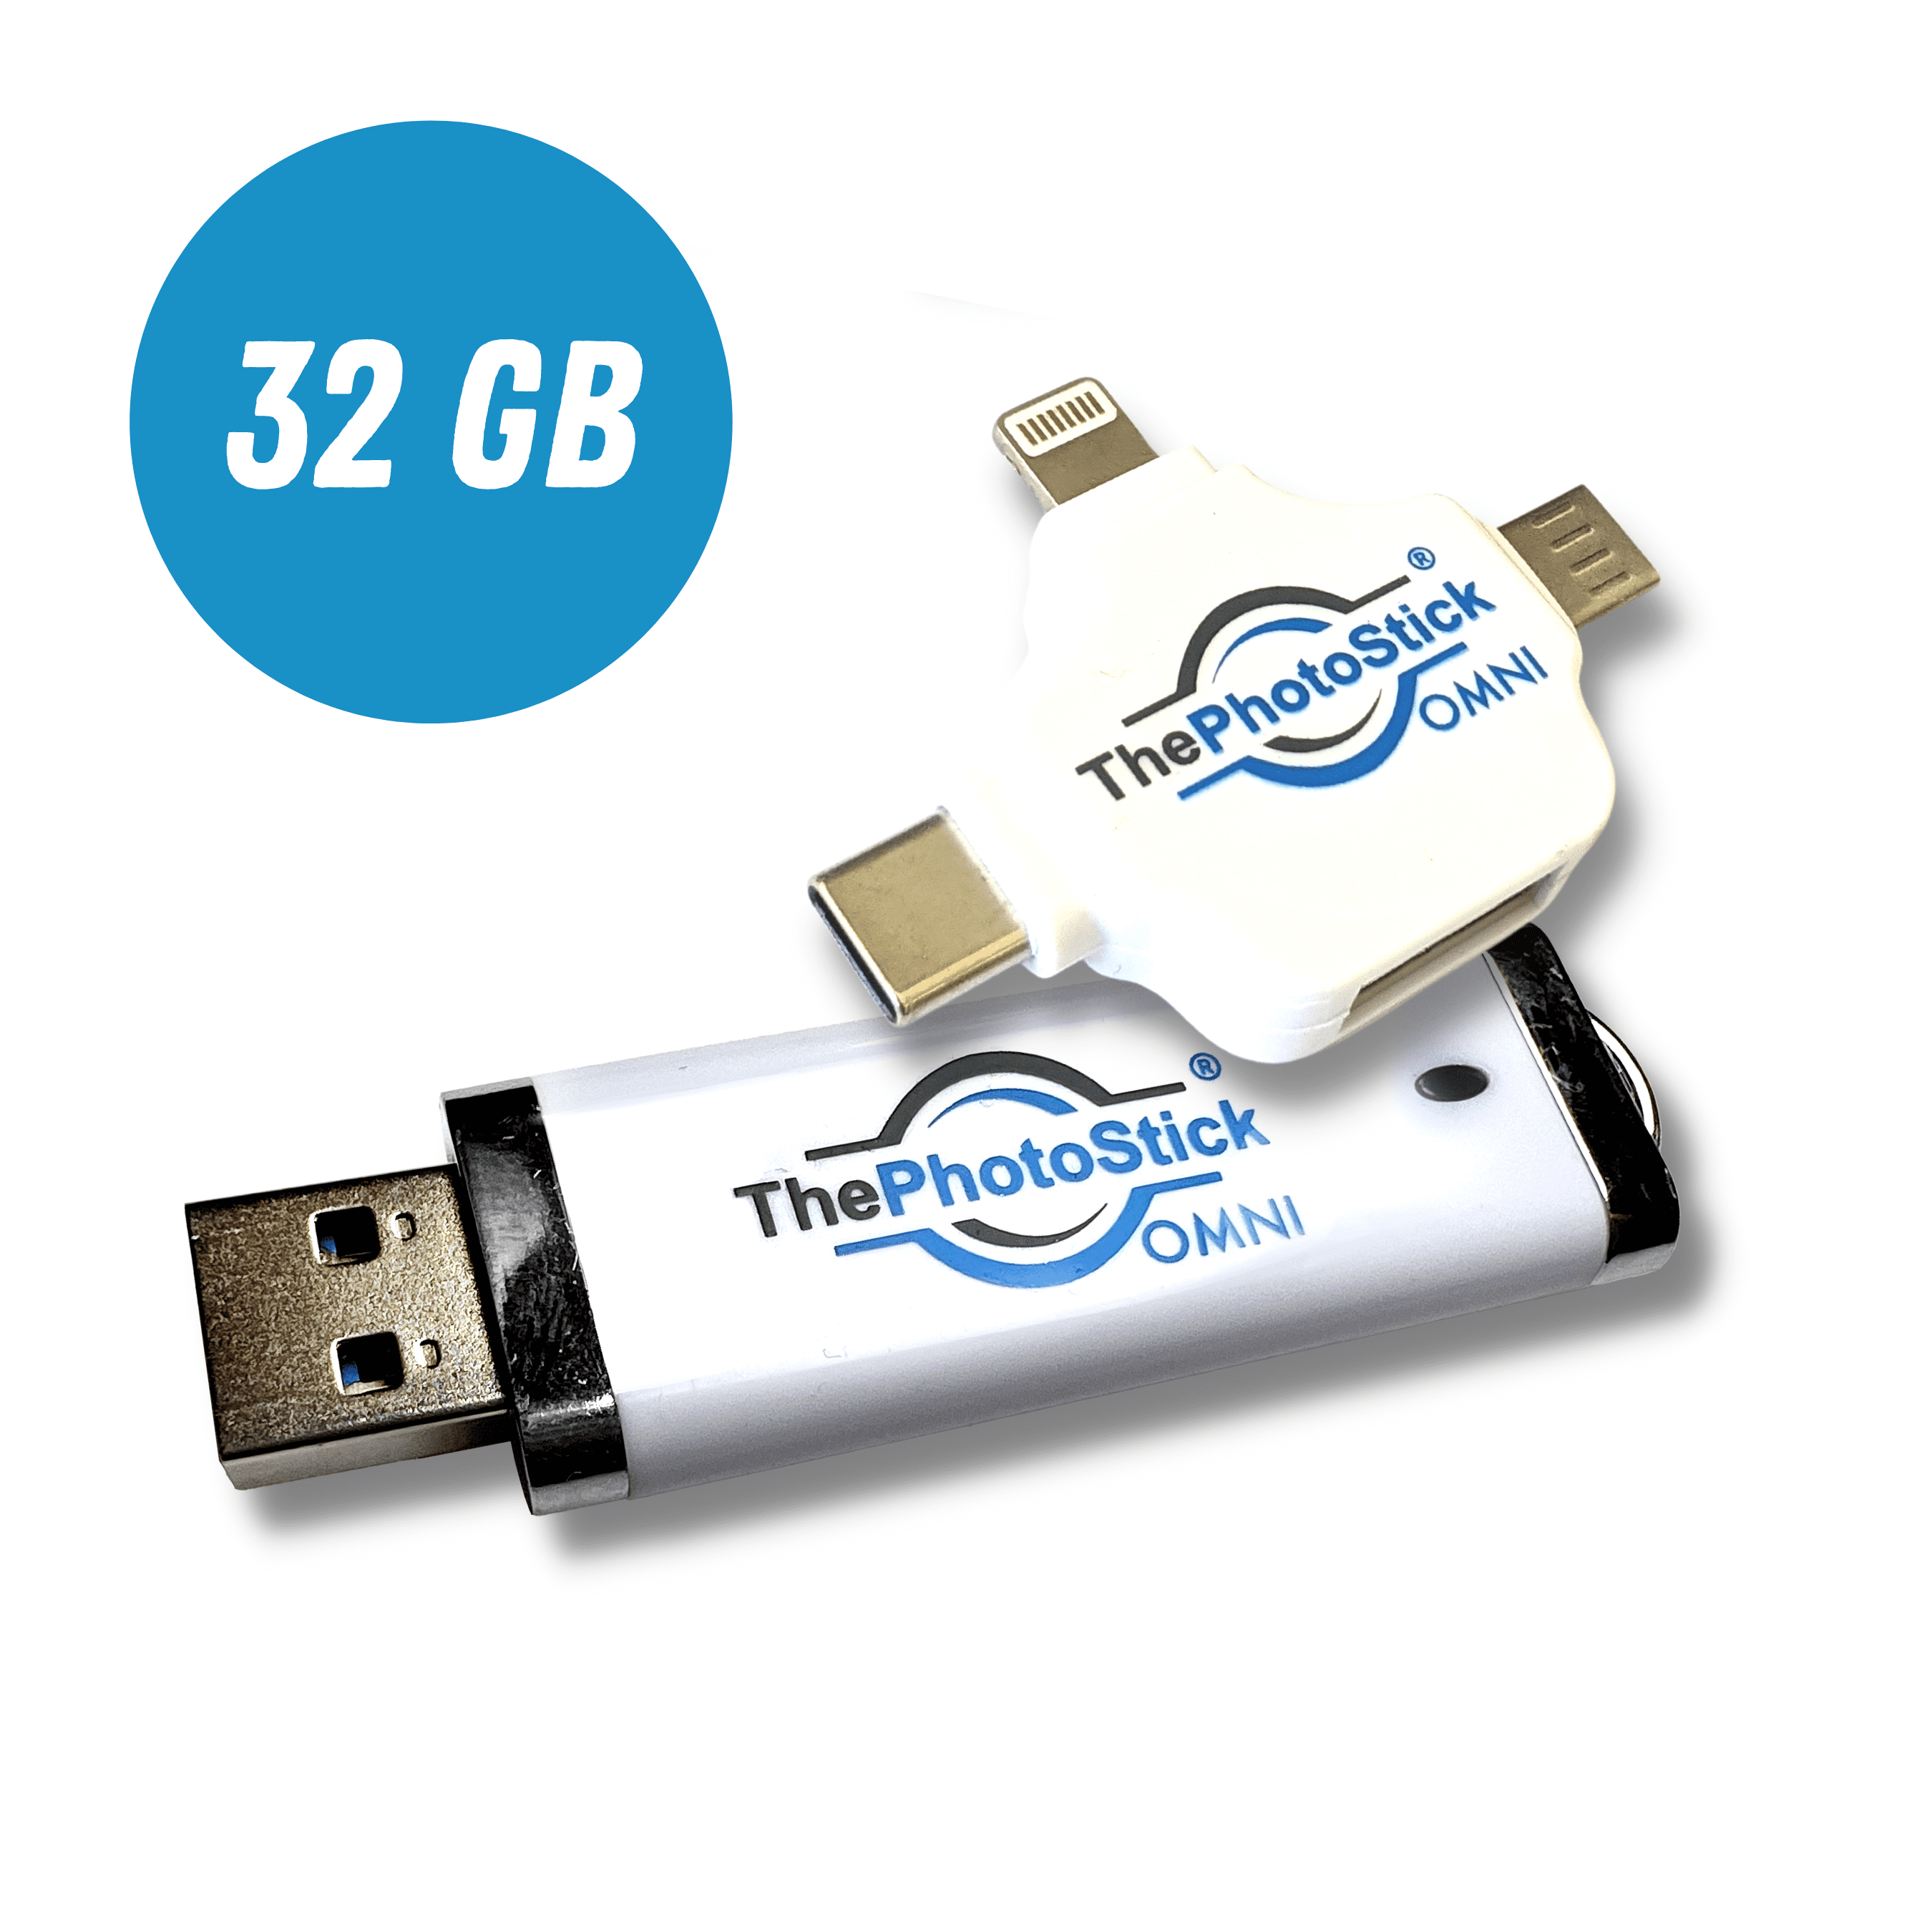 ThePhotoStick® Omni - 32GB | Photo & Video Backup, File Save & Transfer,  USB & Multiport Connection